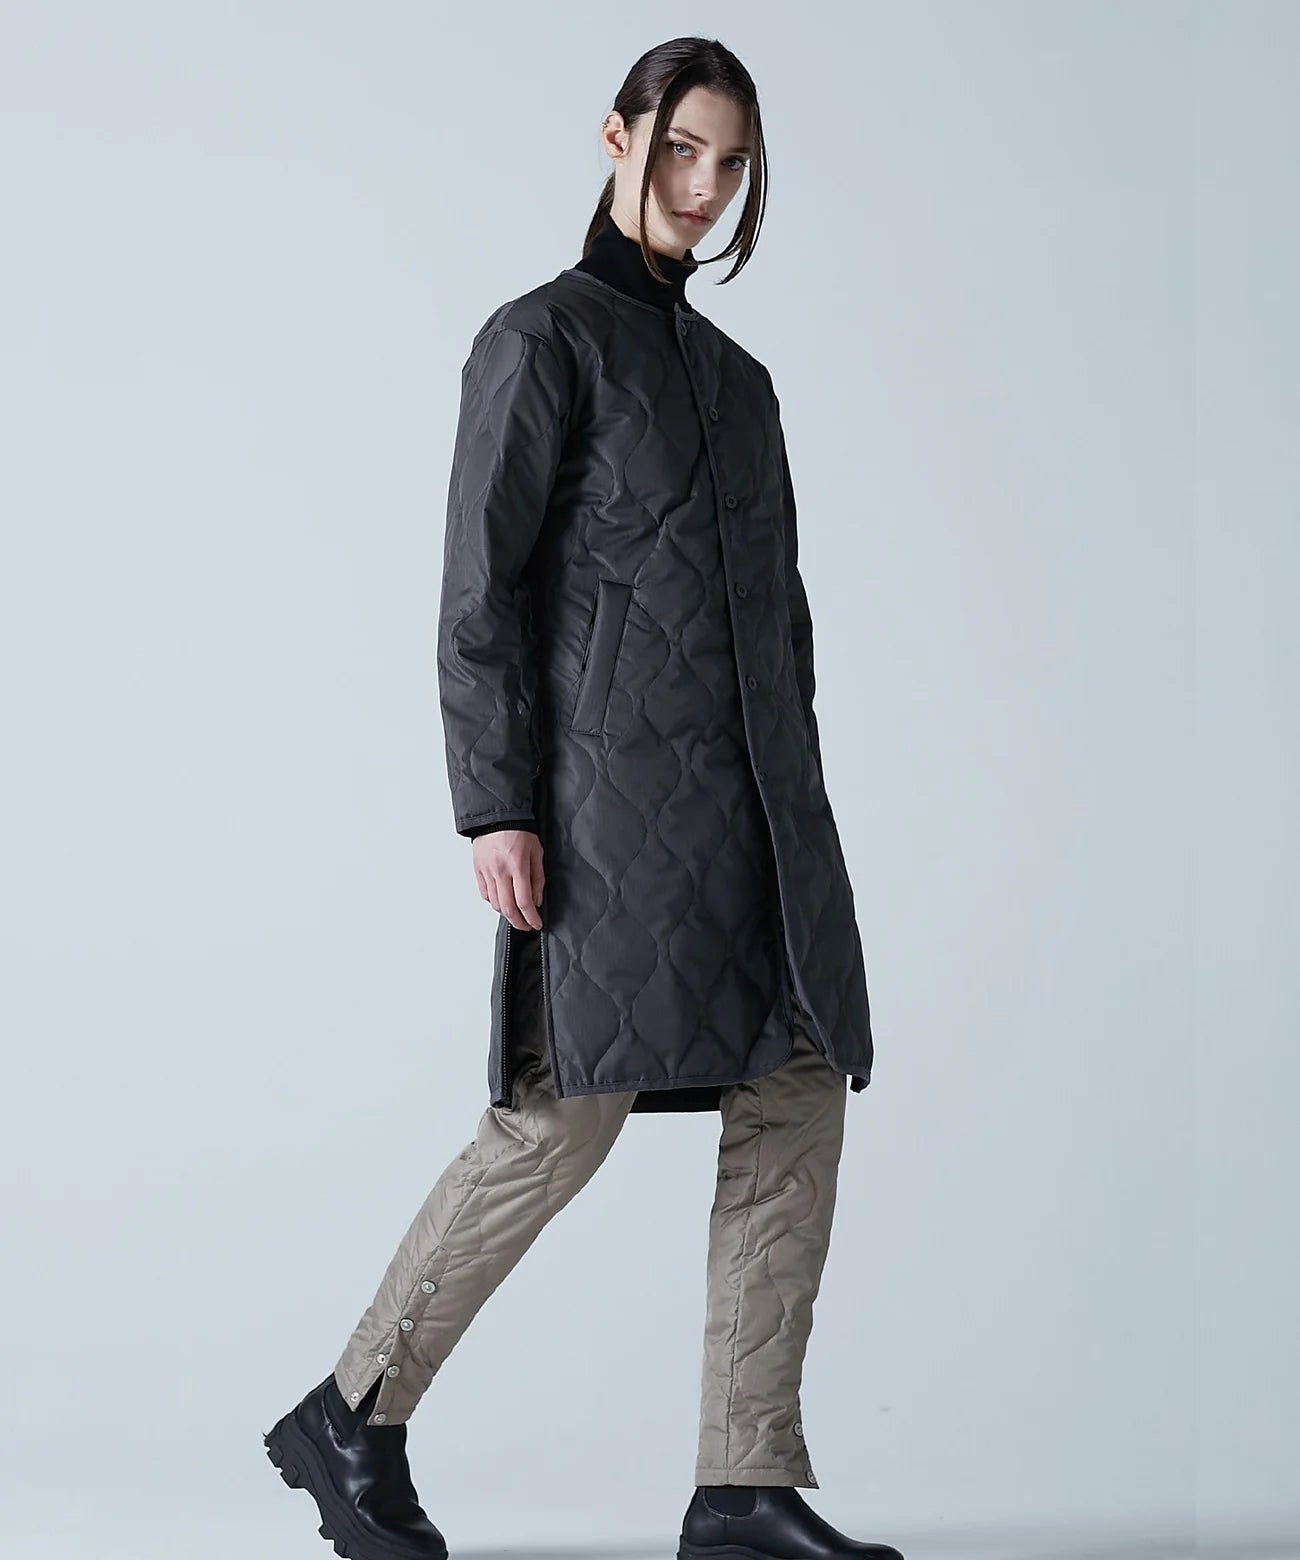 Taion Long Military Crew Neck Quilted Coat - Olive